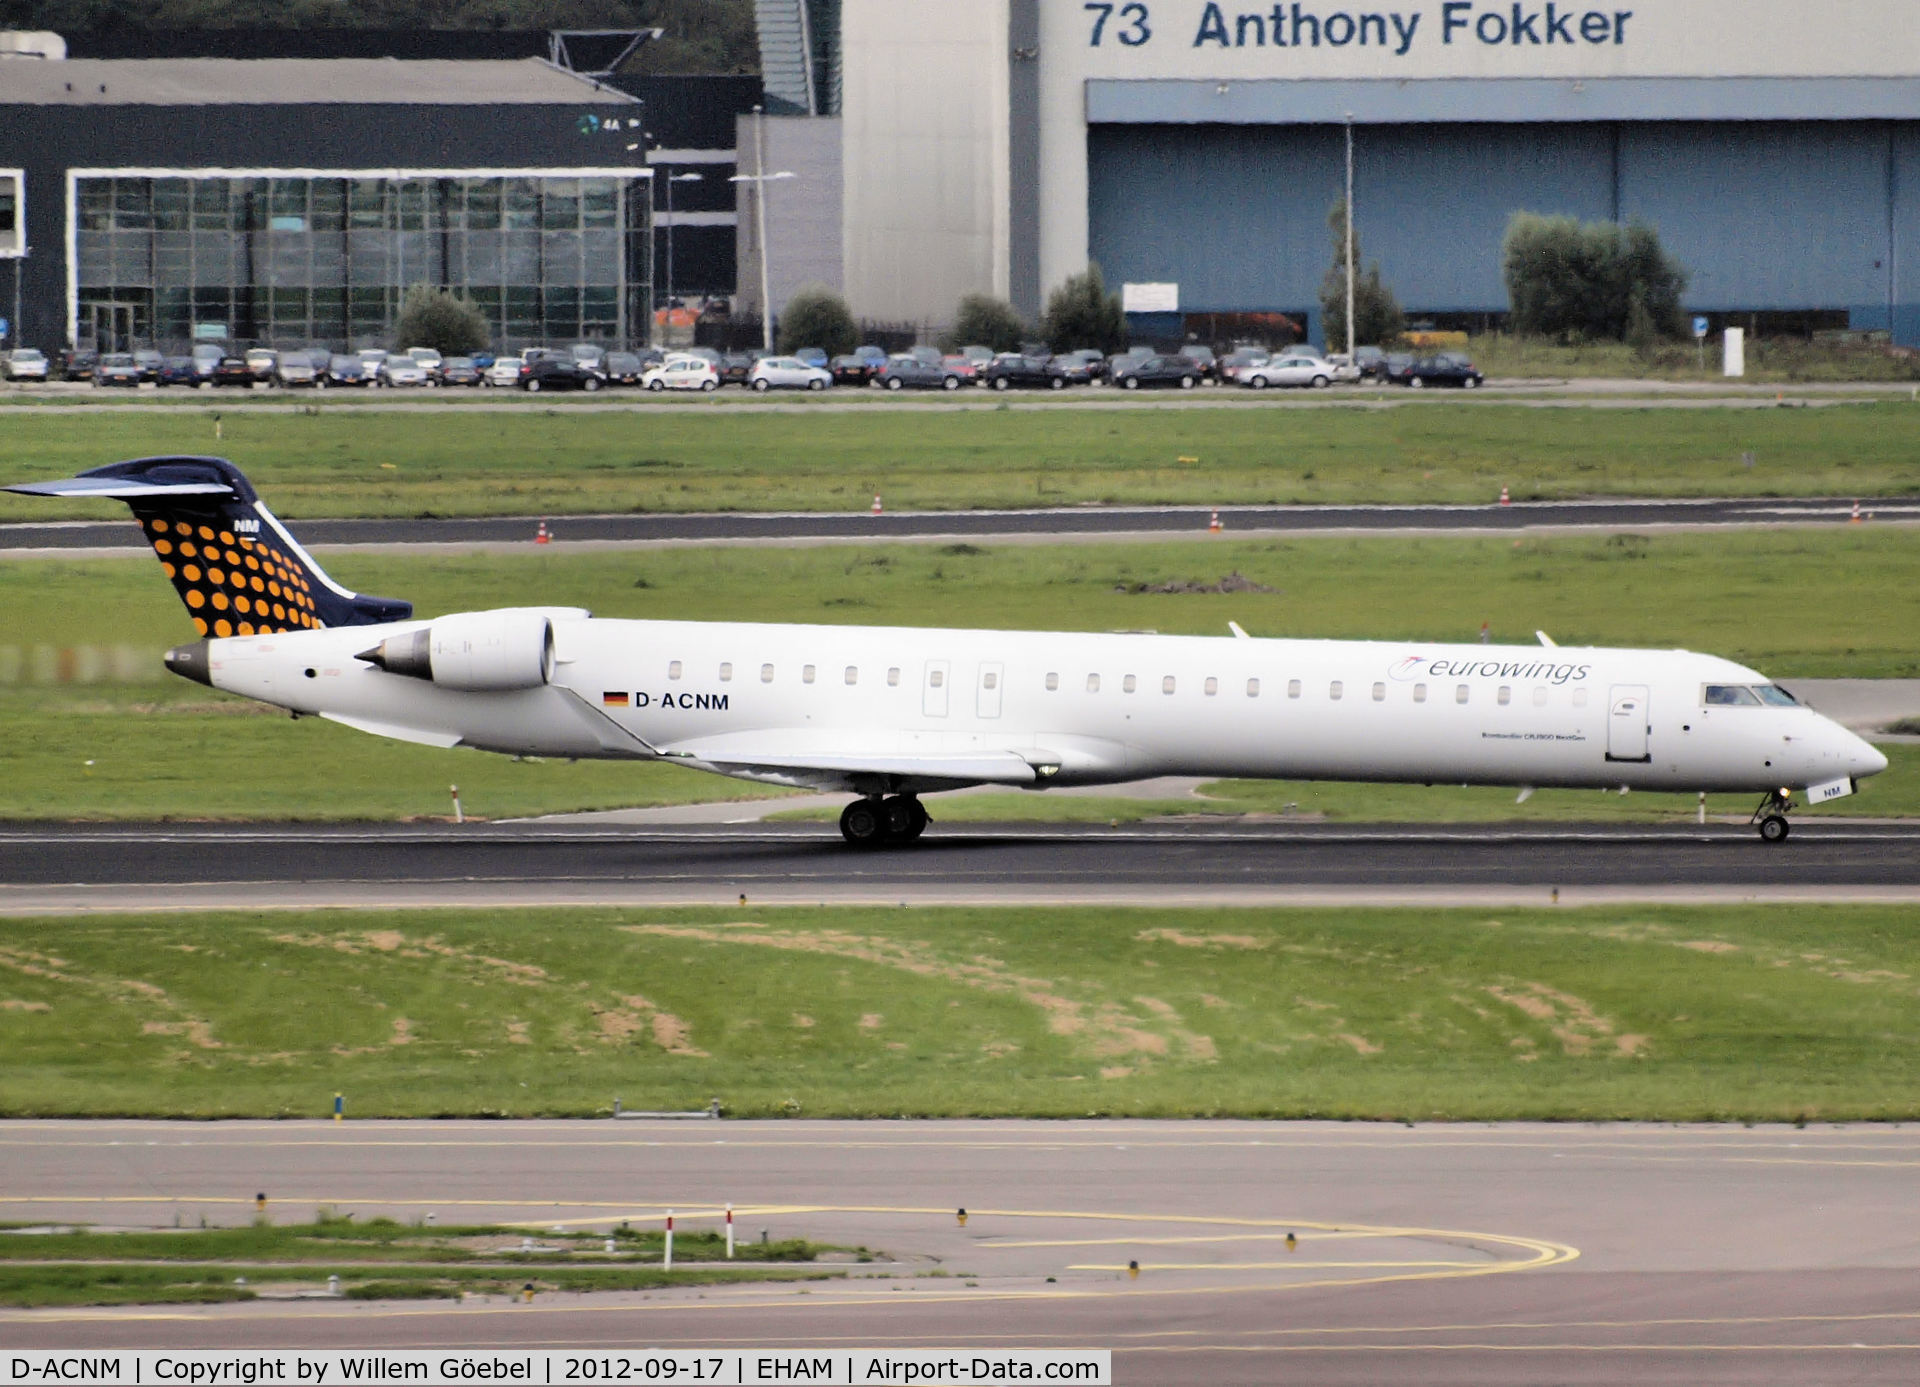 D-ACNM, 2010 Bombardier CRJ-900LR (CL-600-2D24) C/N 15253, Taxi to runway 24 of Schiphol Airport